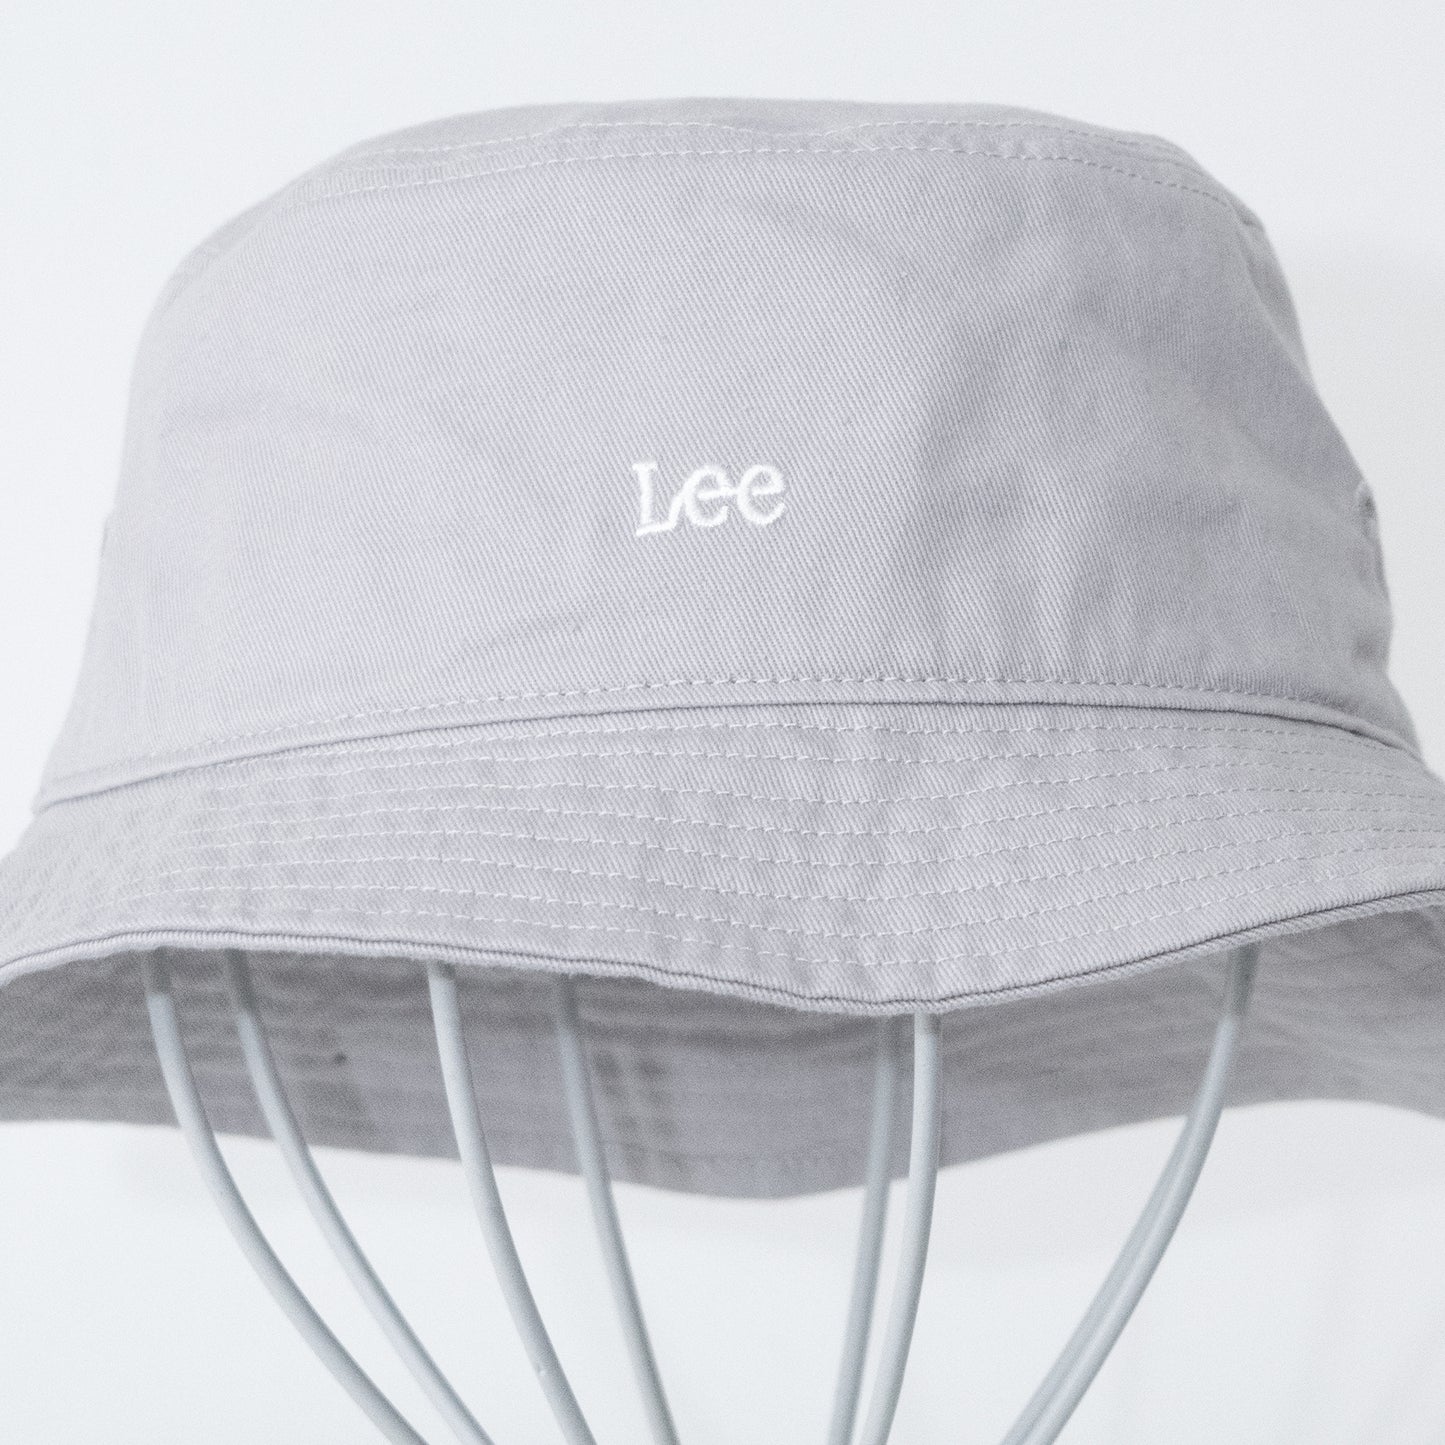 Lee logo embroidered bucket hat GRAY